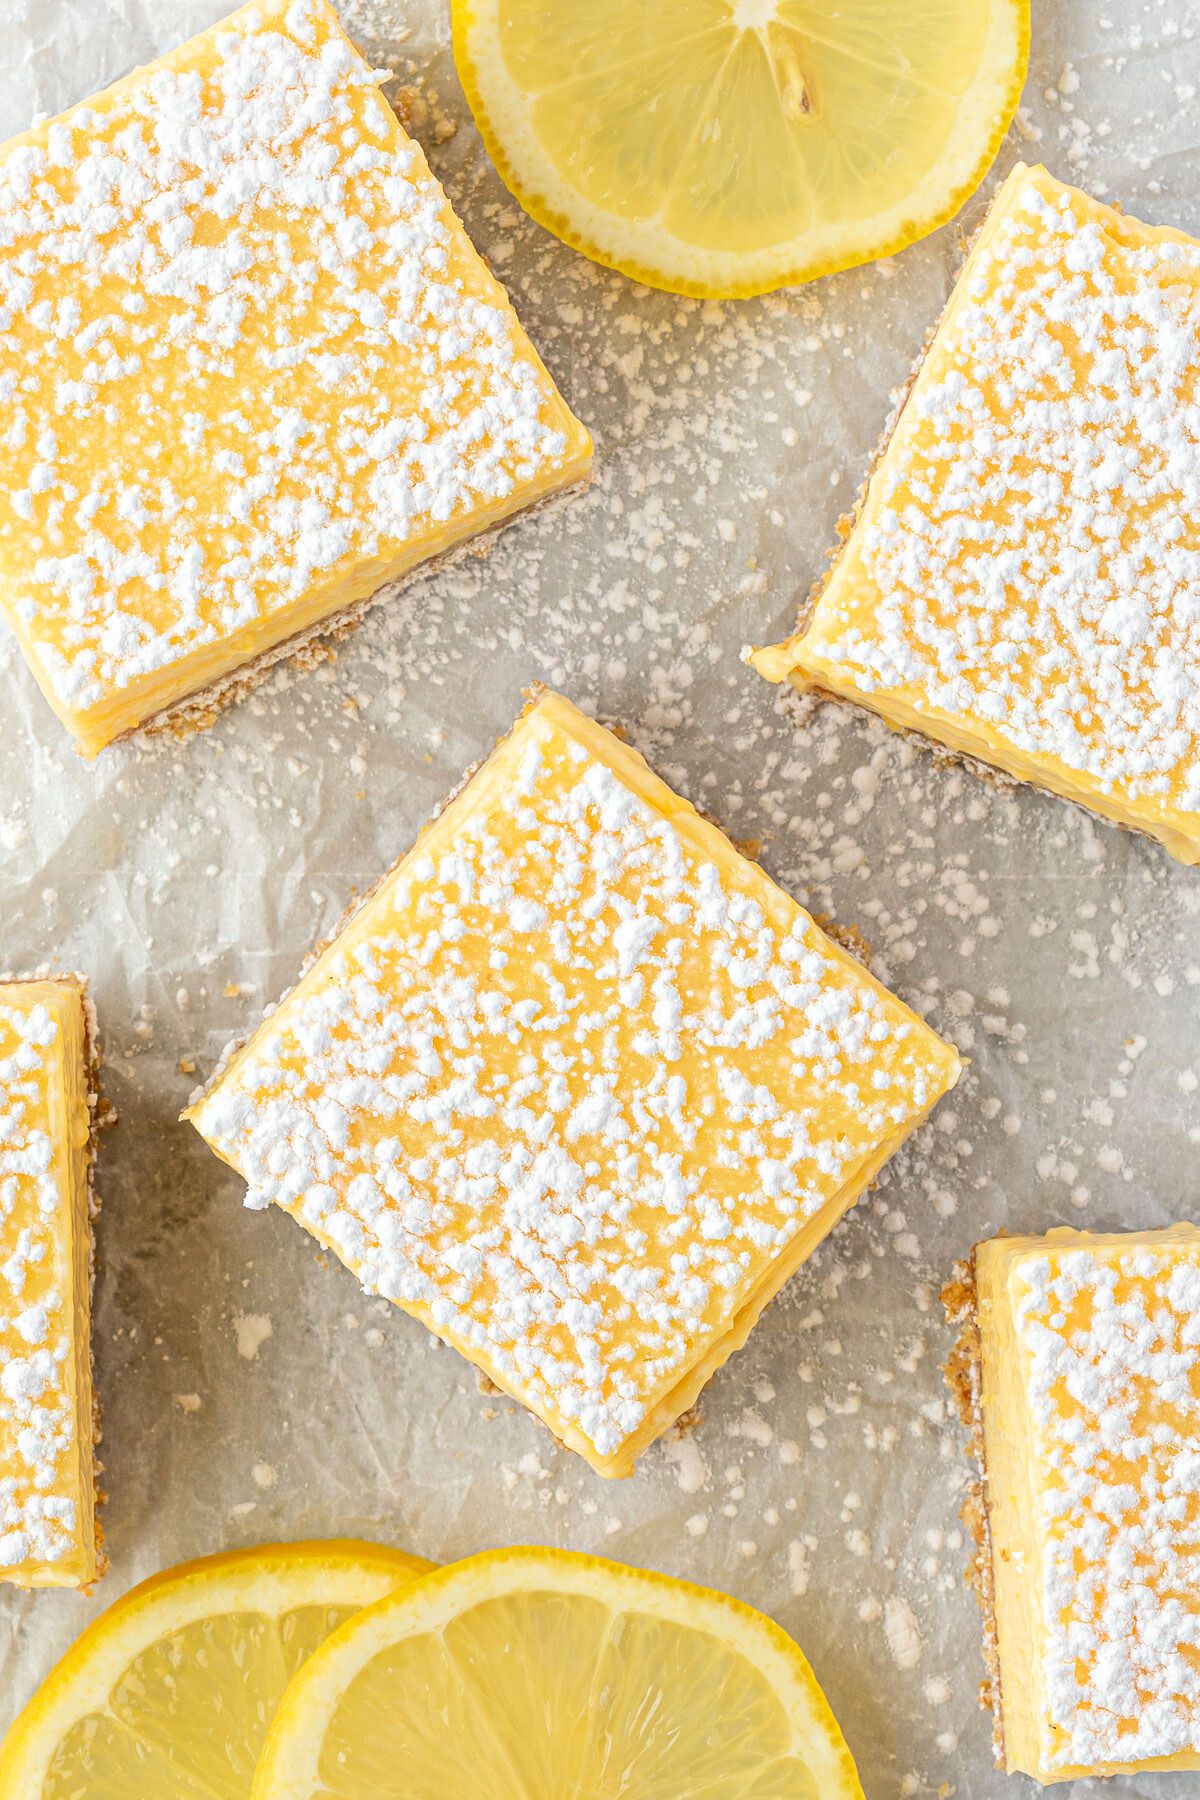 Lemon squares on white parchment dusted with powdered sugar, with 3 lemon slices.